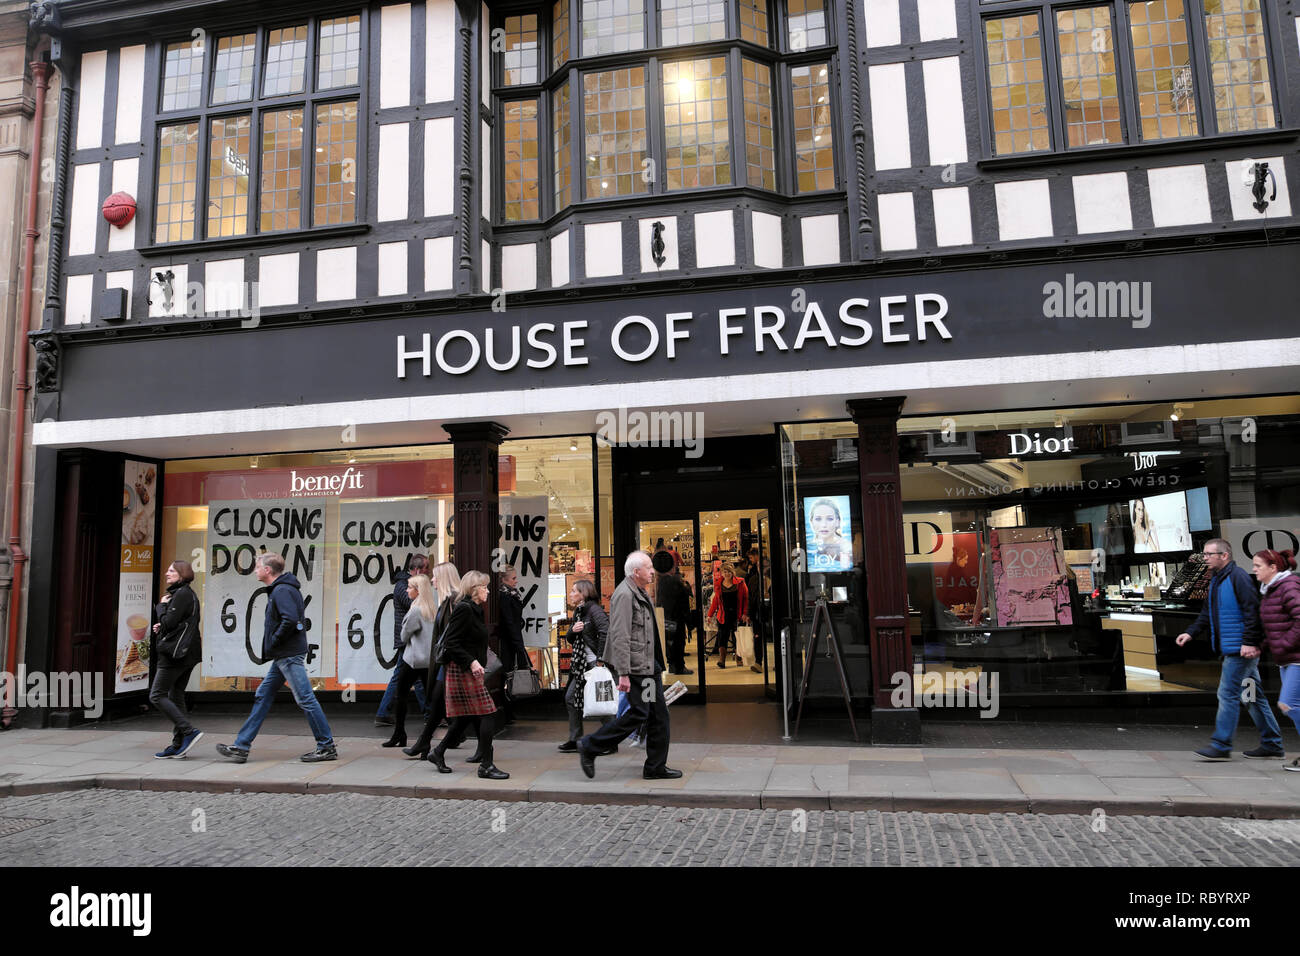 Pedestrians walking outside House of Fraser department store in Shrewsbury closing down sale sign in December 2018 Shropshire England UK  KATHY DEWITT Stock Photo